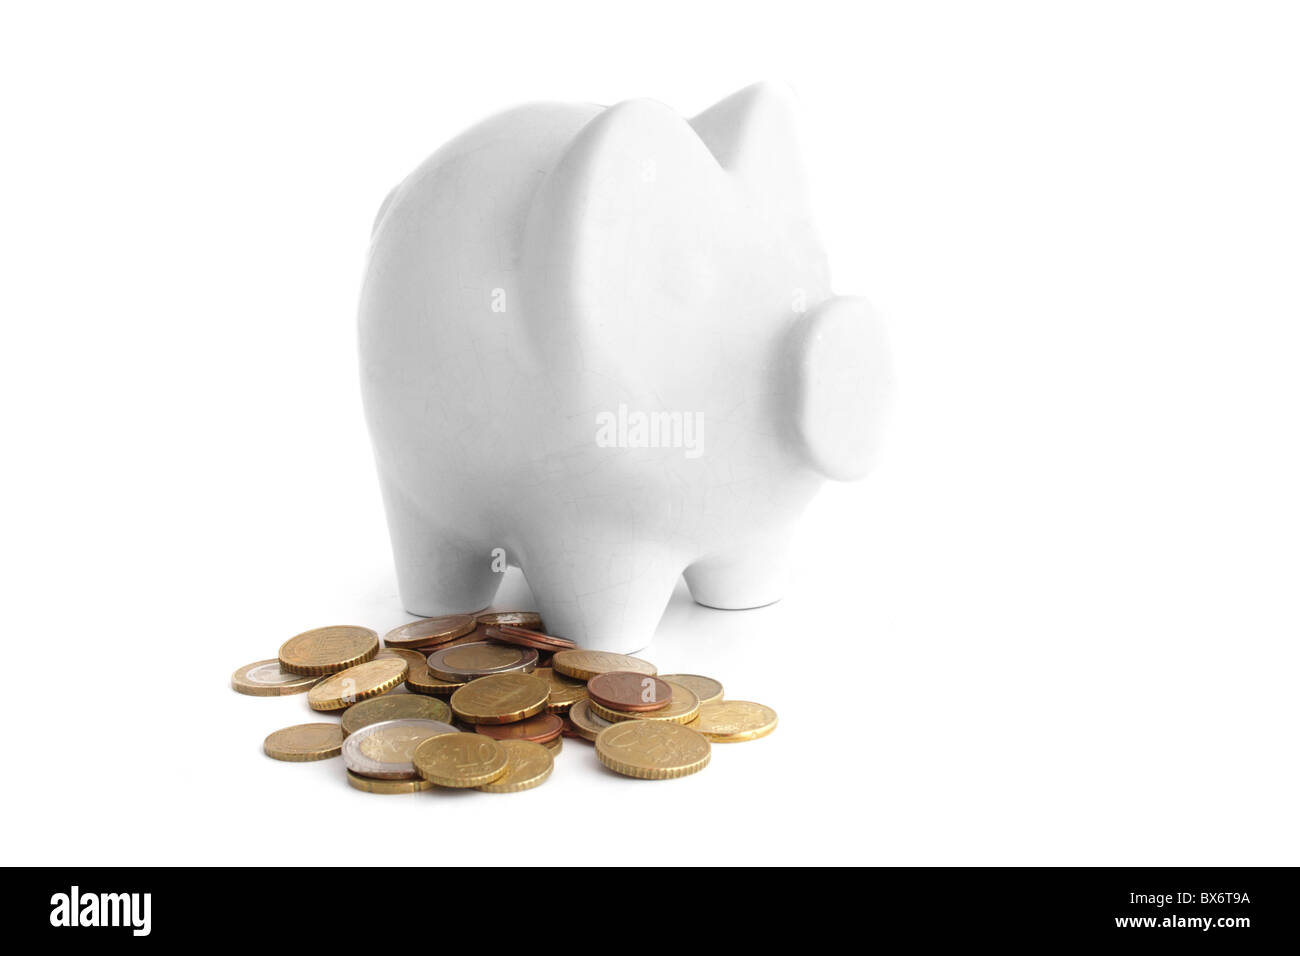 A piggy bank standing next to some money. All isolated on white background. Stock Photo